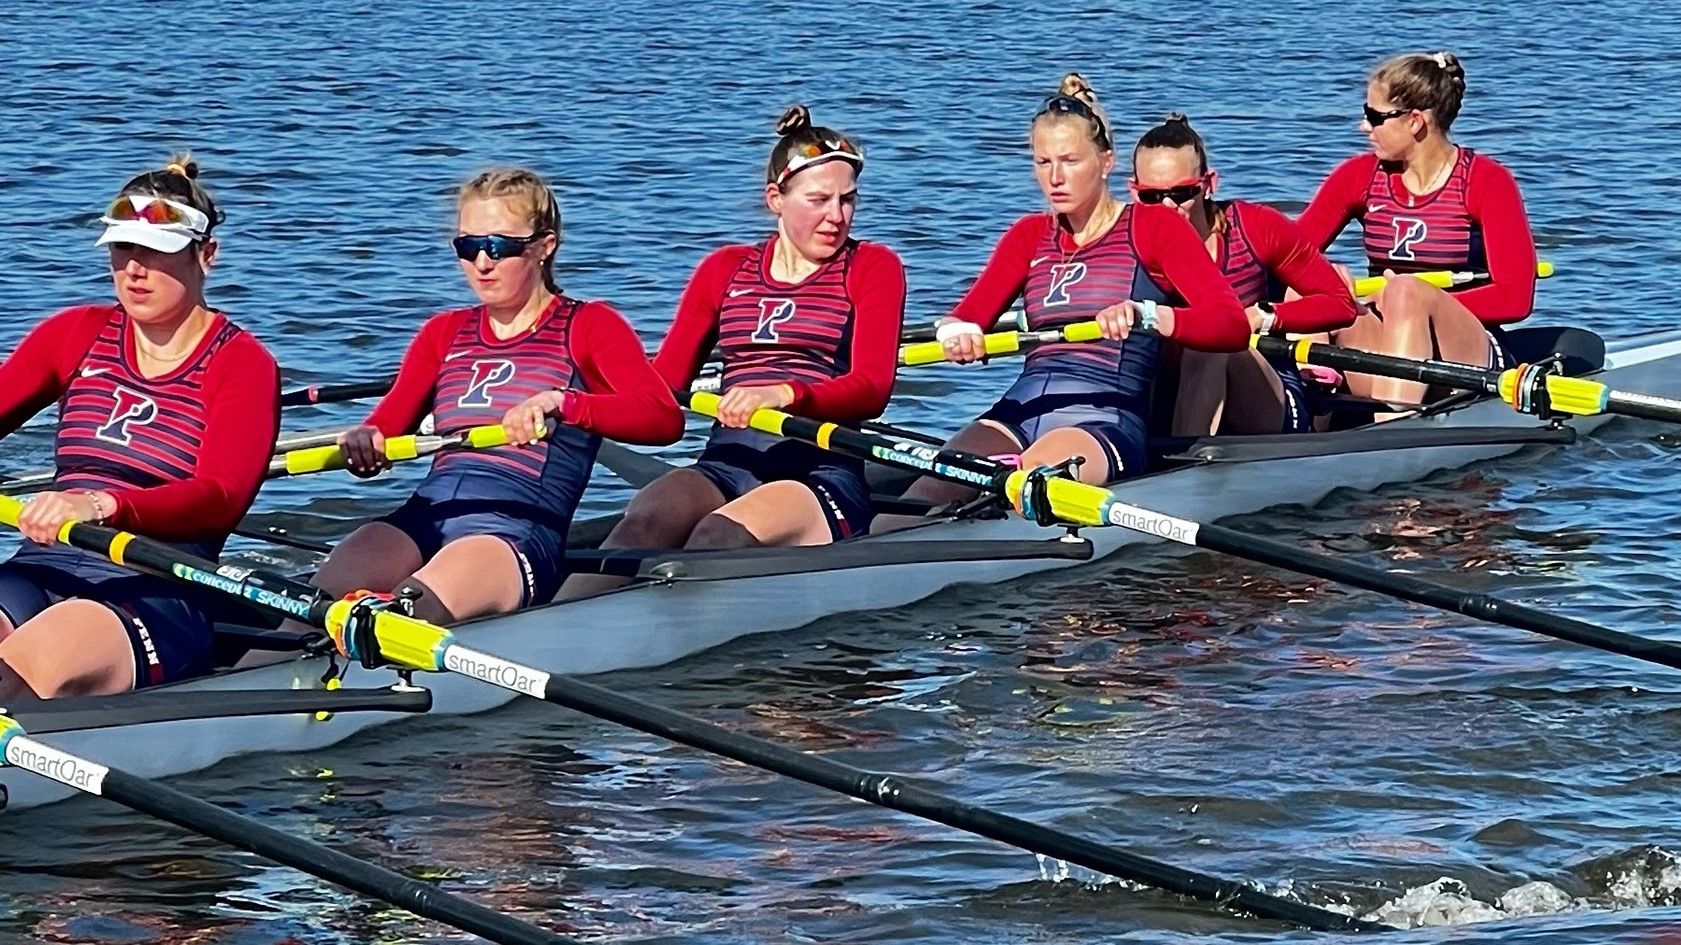 Rowers row in their boat on the water during a competition.